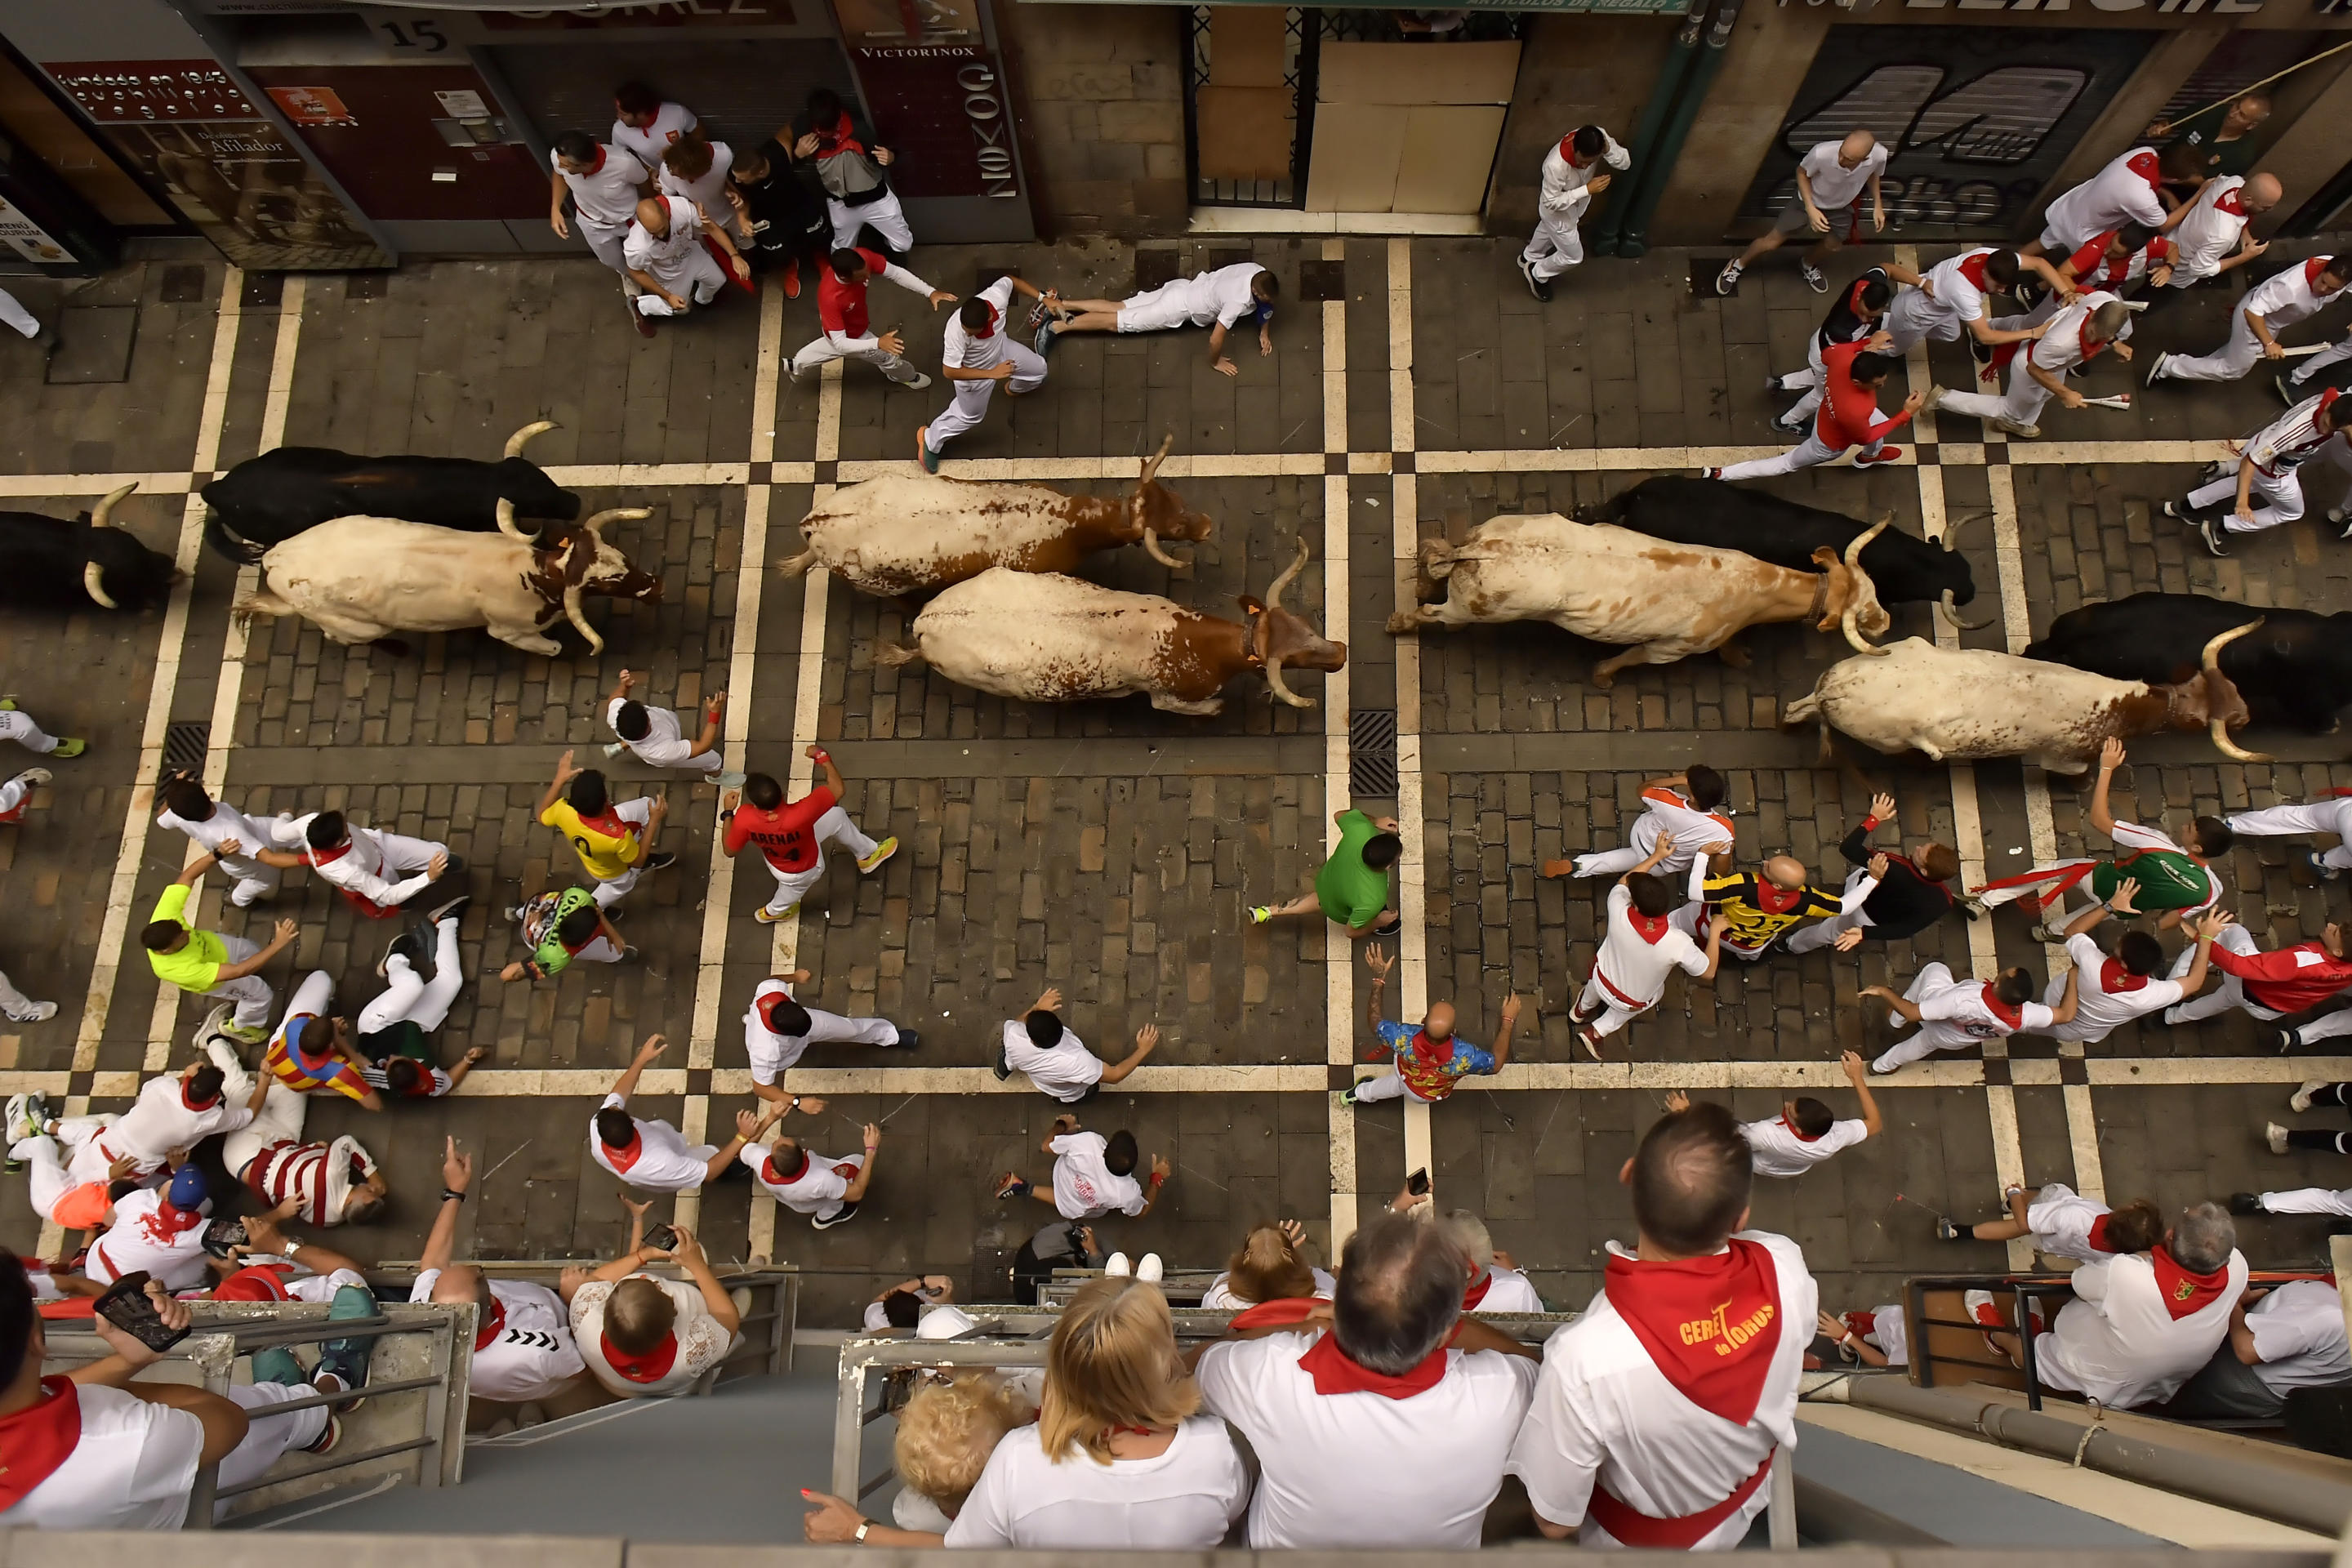 A view from above of bulls and festivalgoers running down a narrow street during the Pamplona bull run as spectators watch from a balcony.